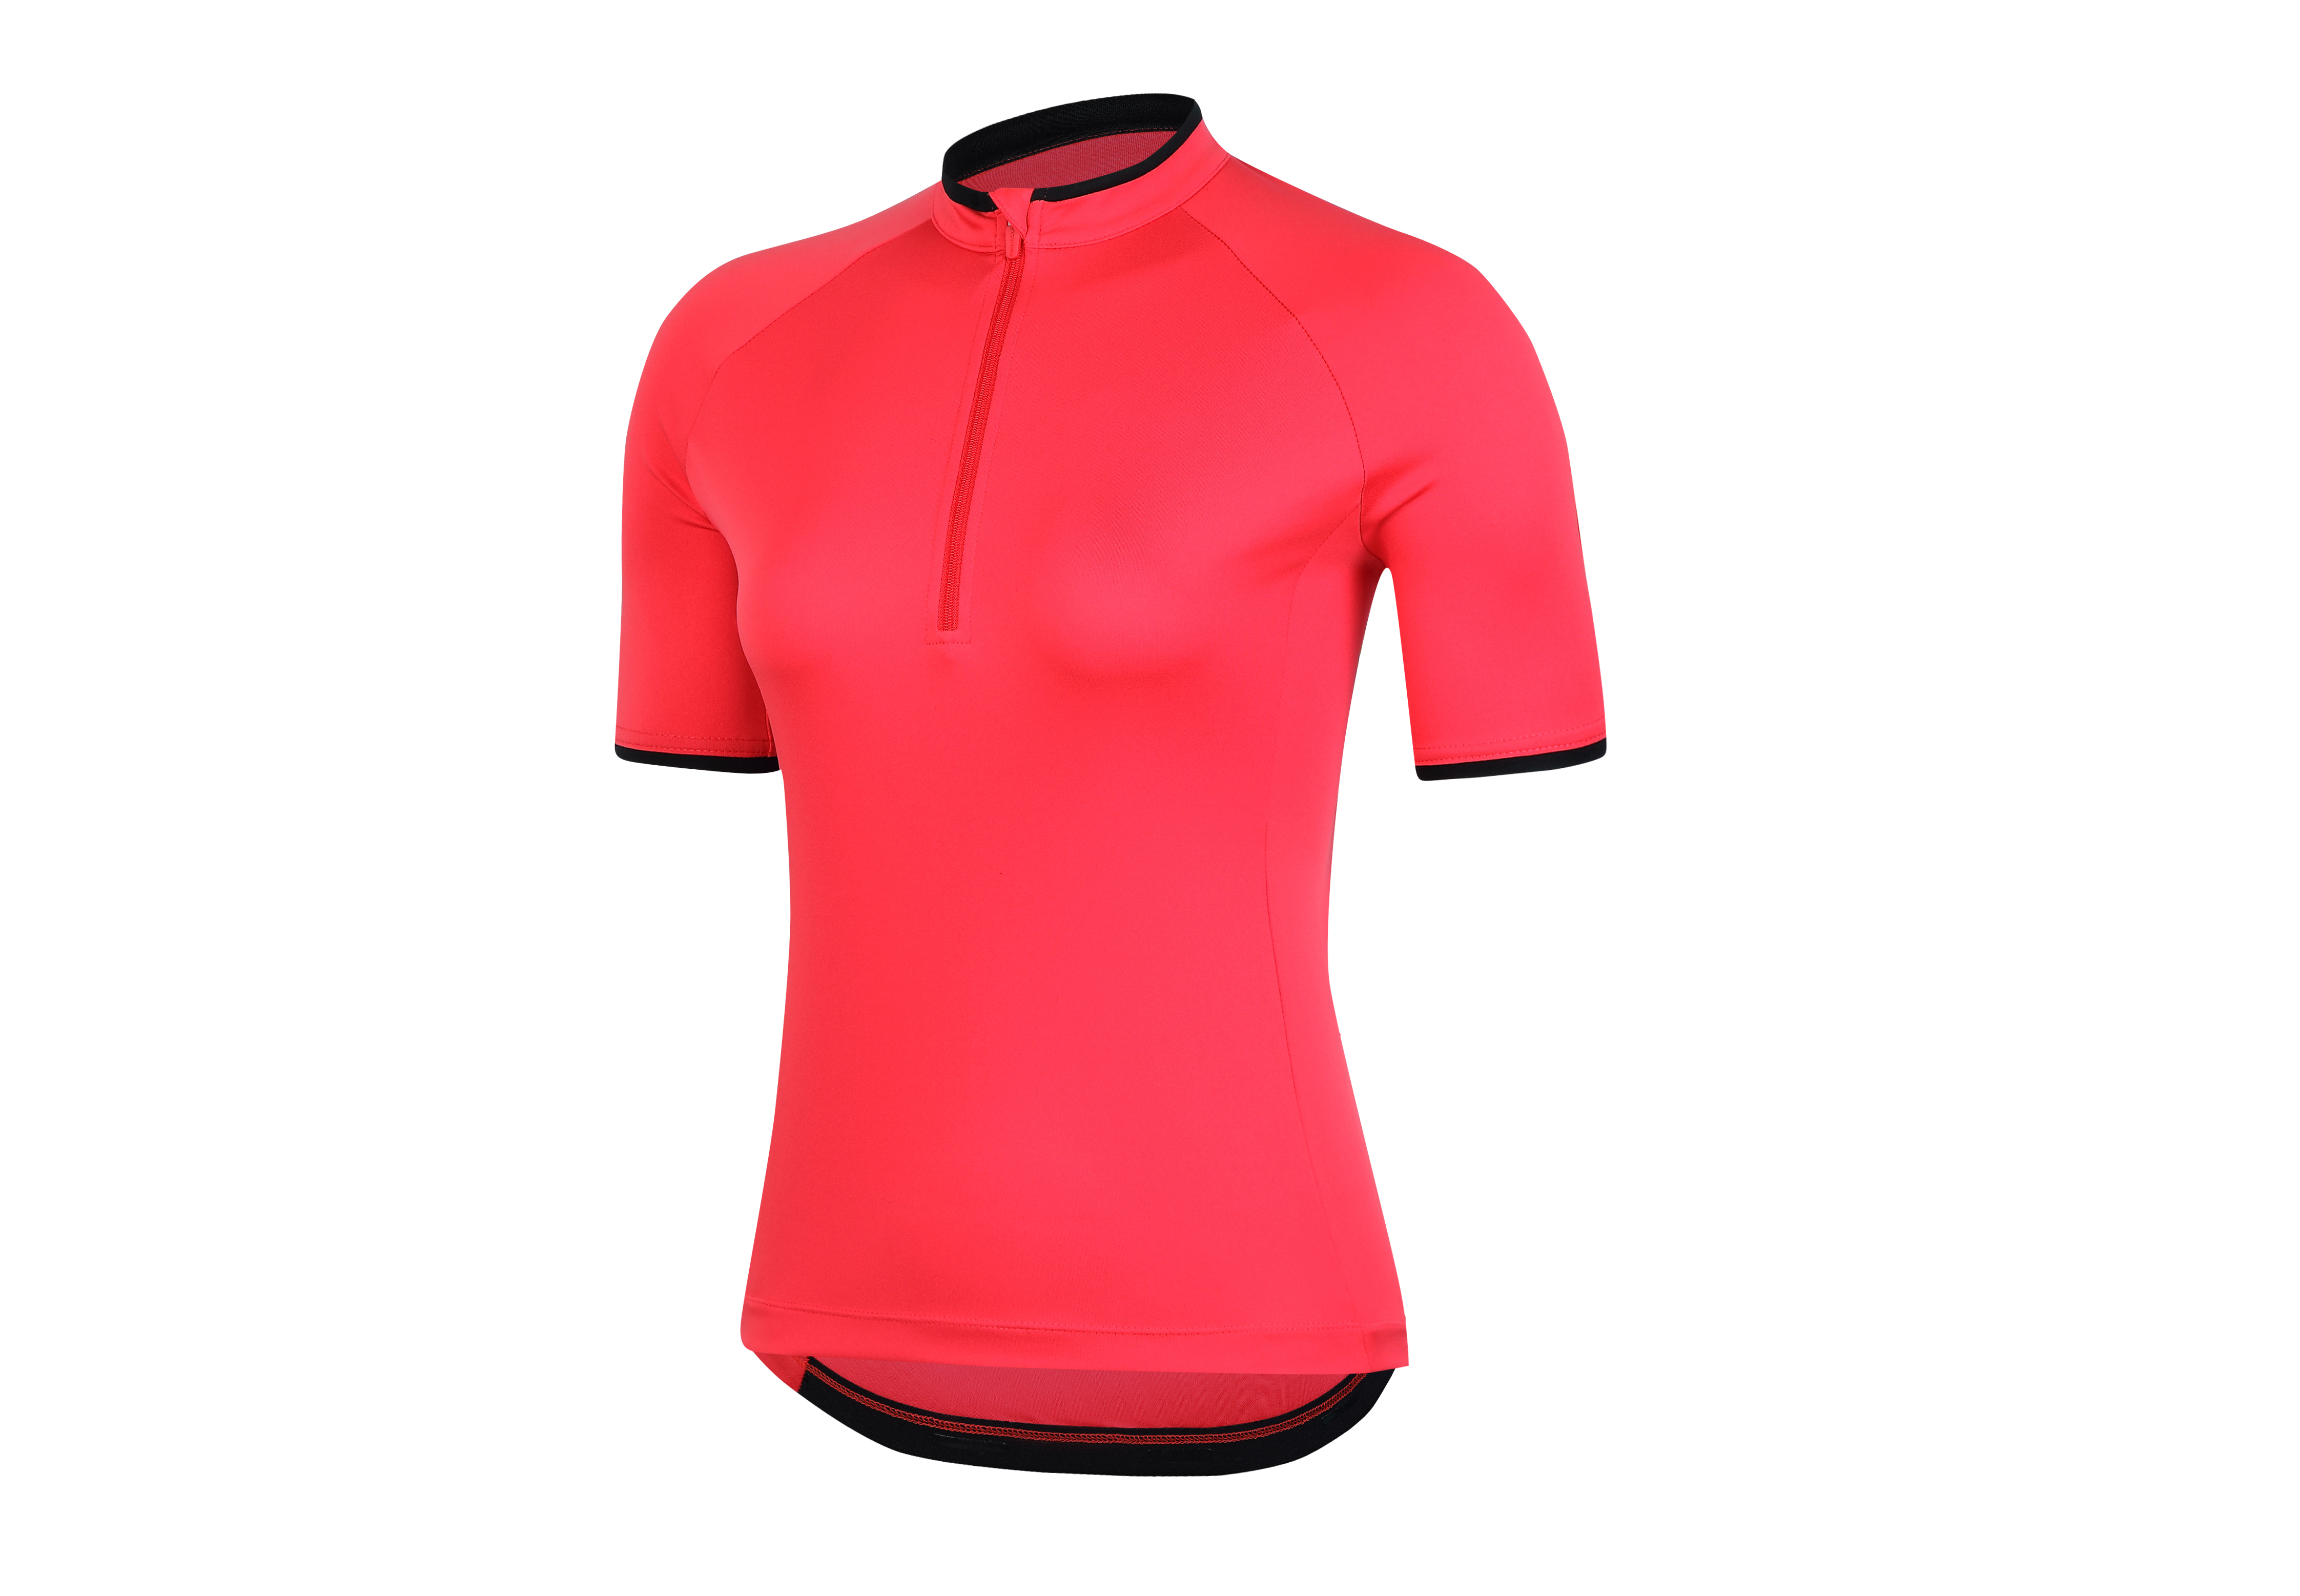 Women’s knitted cycling S/S Jersey.